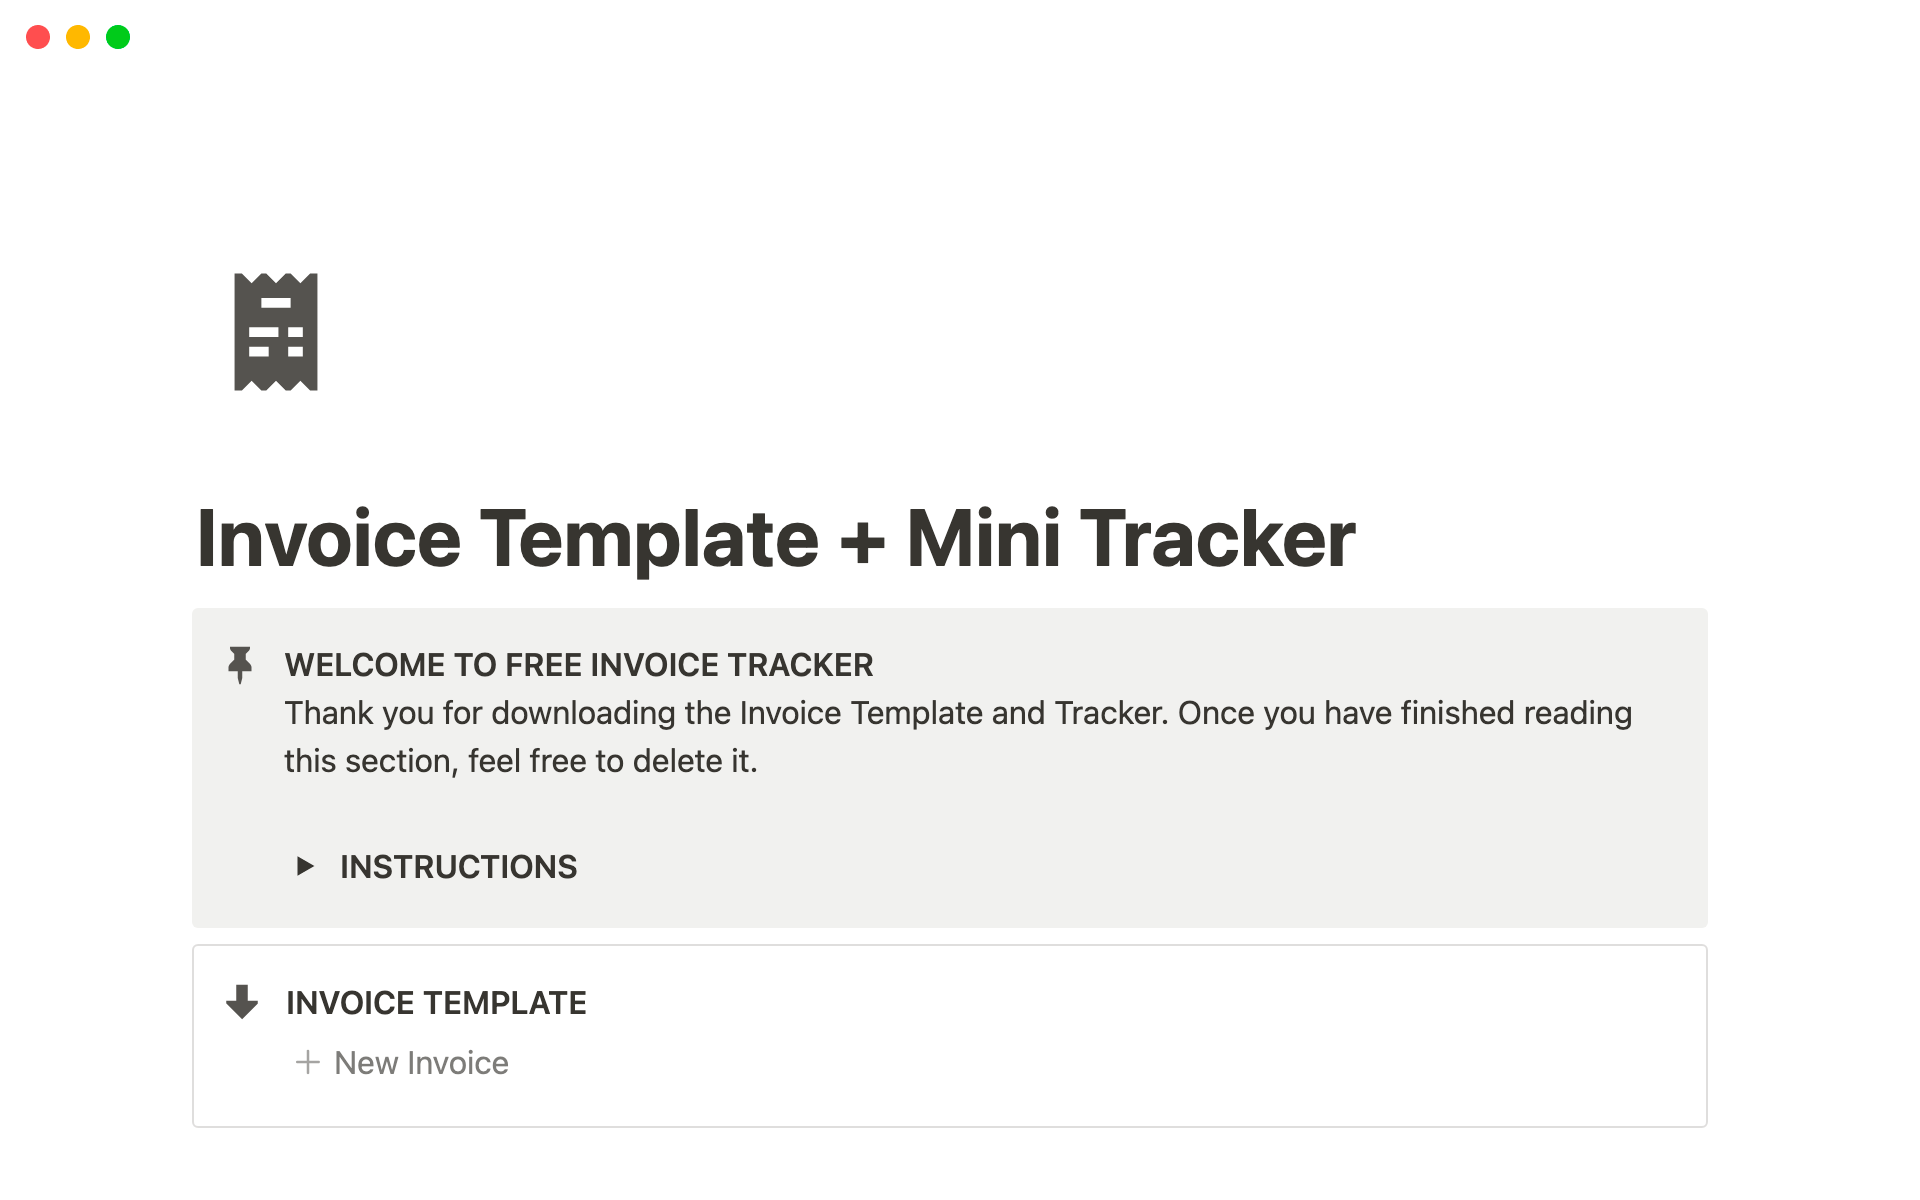 Invoice creation and simple tracking